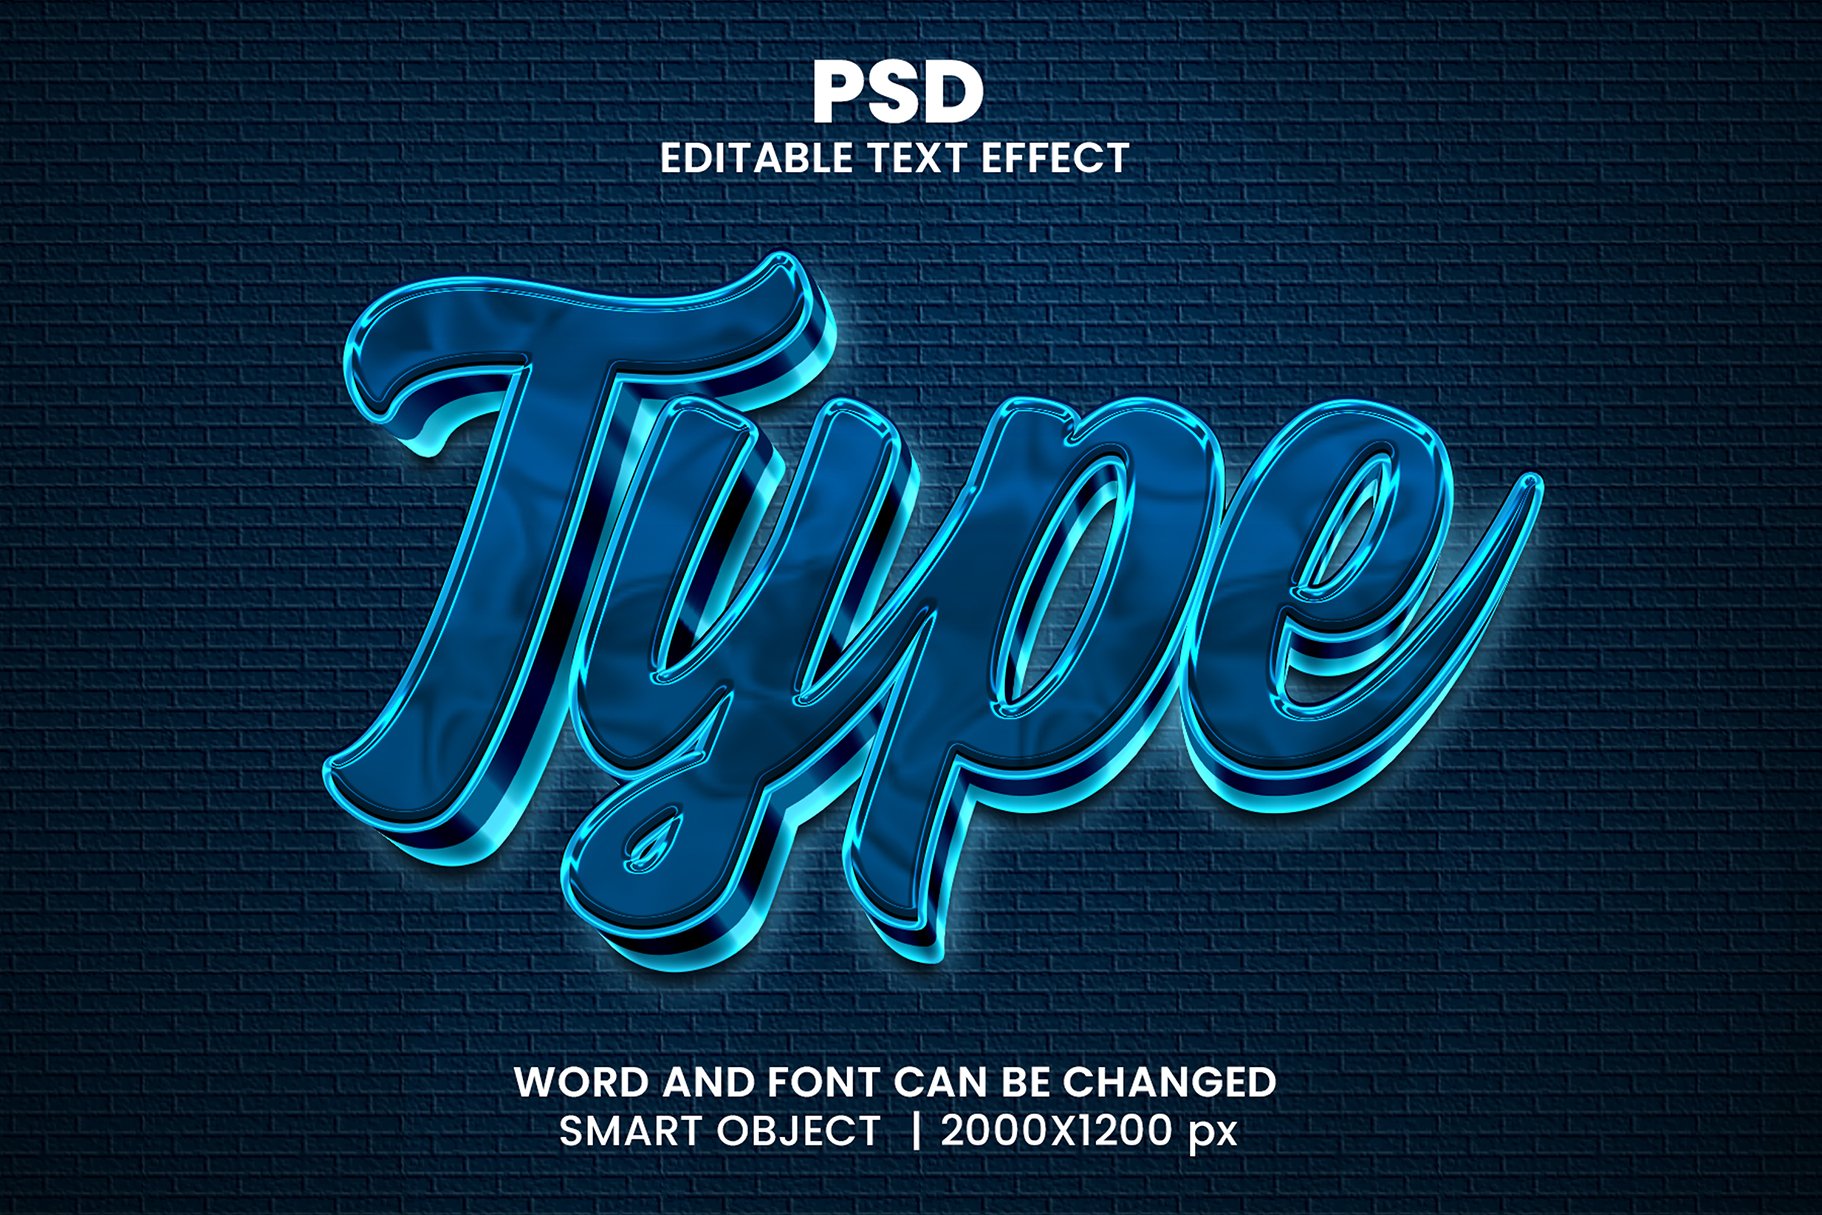 Type 3d Editable Text Effect Stylecover image.